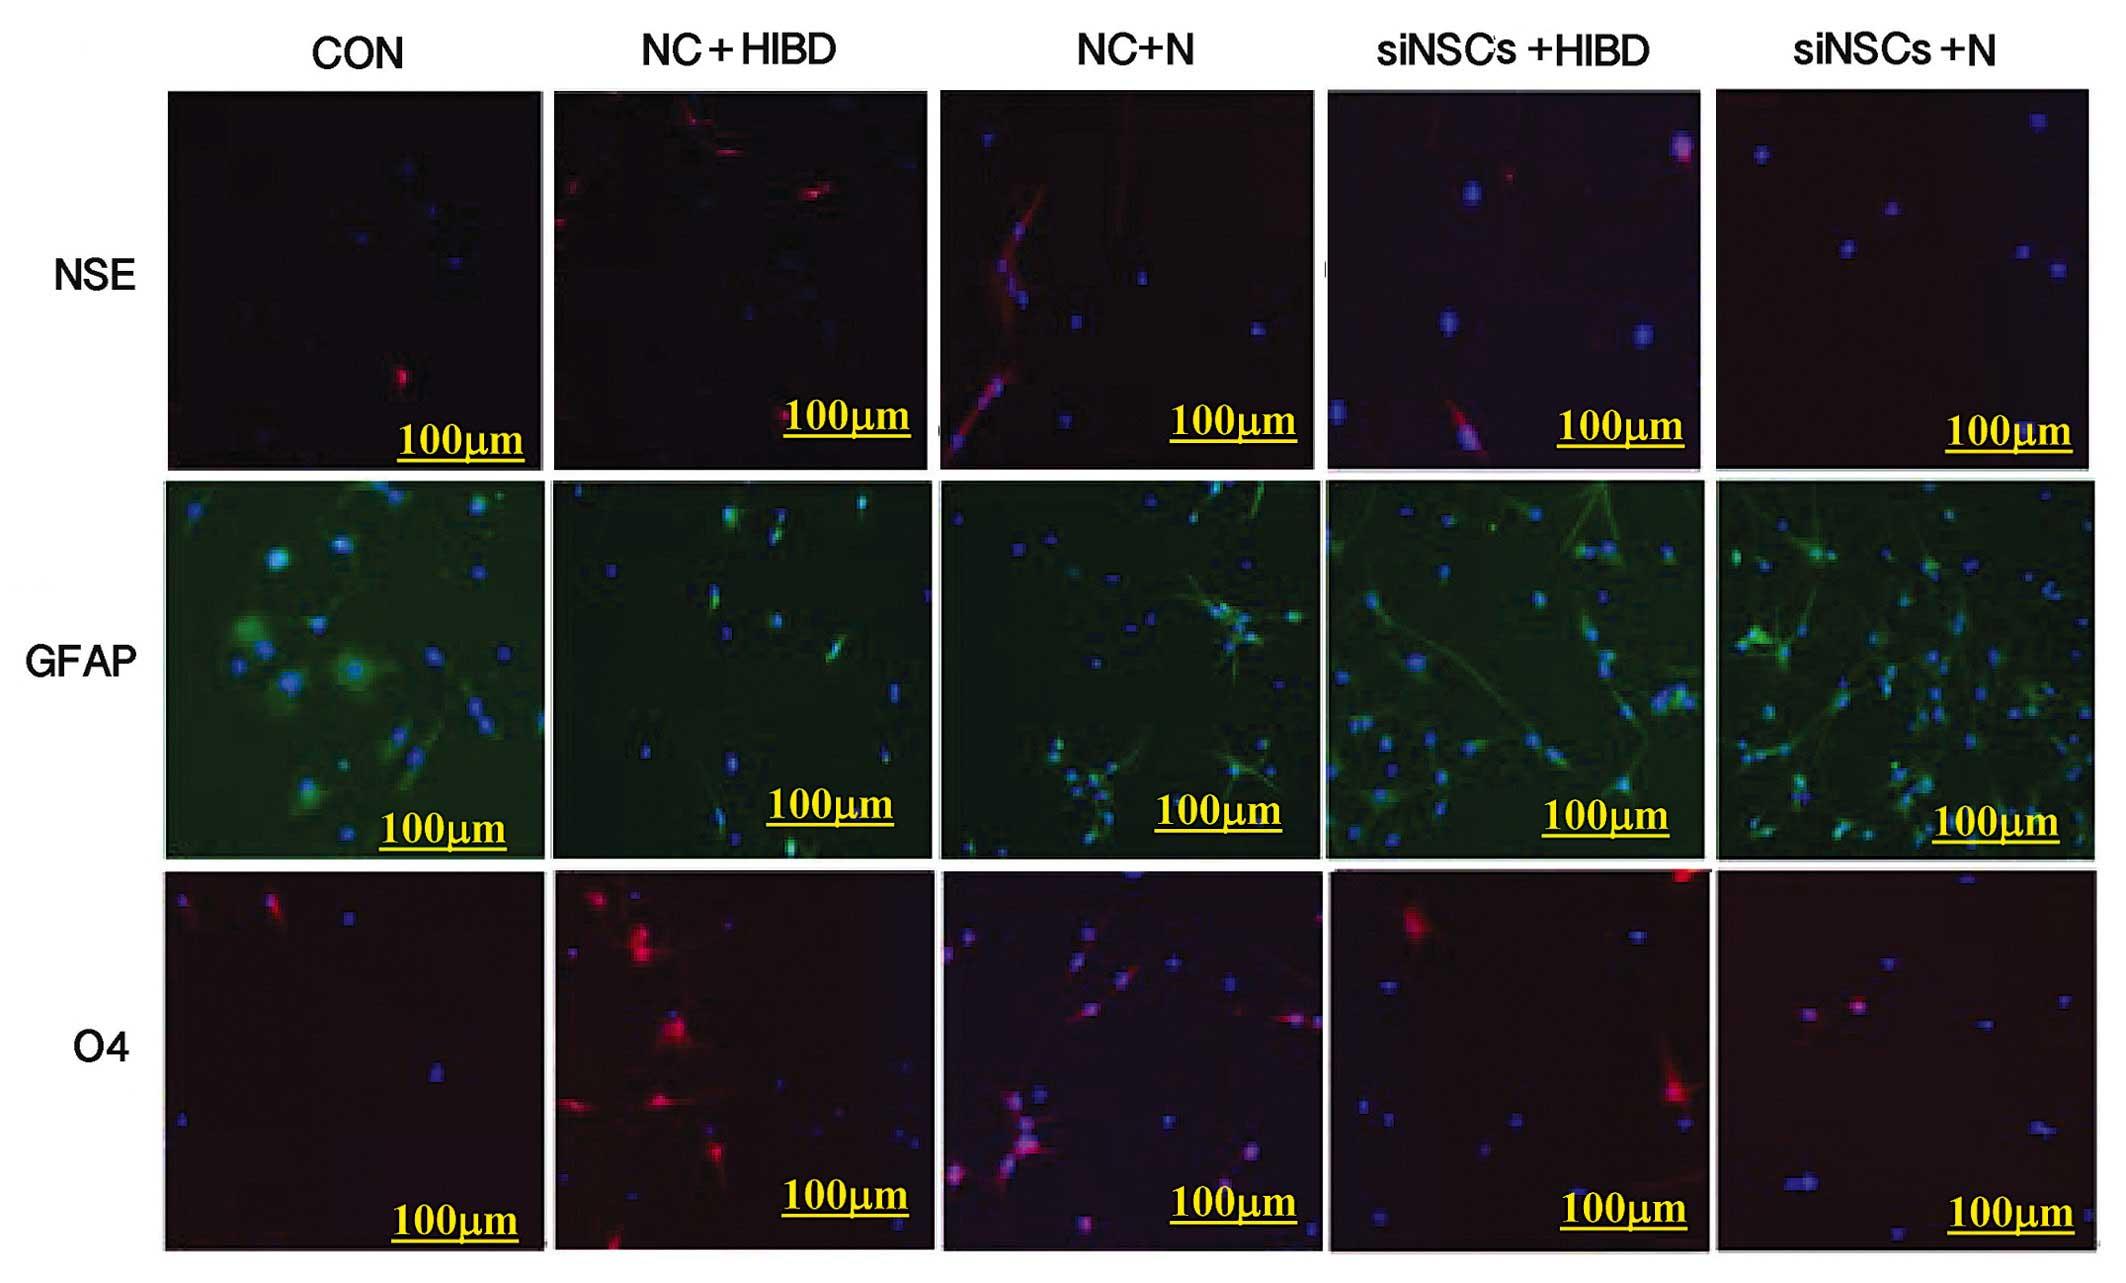 Expressions of NSE, O4 and GFAP in the experimental groups indicating NSC differentiation by fluorescence microscopy (×100). NSCs were fixed in ReadiUse™ 4% formaldehyde fixation solution (AAT Bioquest, CA, USA) for 15–20 min at room temperature, and then permeabilized with 1% (vol/vol) Triton X-100 (Invitrogen; Thermo Fisher Scientific, Inc.) in phosphate-buffered saline (PBS; Hyclone; GE Healthcare Life Sciences) for 30 min, and incubated in blocking buffer which contained 10% goat serum (Biorbyt, Cambridge, UK) for 10 min.  Immunofluorescence staining performed simultaneously on each group, red (CY3) represents the expression NSE or O4 in cytoplasm, green (FITC) represents the expression of GFAP in cytoplasm, blue (Hoechst 33258) represents the nucleus. NSC, neural stem cell; NSE, enolase 2; GFAP, glial fibrillary acidic protein; O4, oligodendrocyte cell surface antigen O4; CON, blank control group; NC, negative control plasmid-transfected cells; N, normal brain tissue; HIBD, hypoxic-ischemic brain damage tissue; siNSC, β-catenin small interfering RNA-transfected cells. Source: <b>Impact of siRNA targeting of β-catenin on differentiation of rat neural stem cells and gene expression of Ngn1 and BMP4 following in vitro hypoxic-ischemic brain damage</b> by Zhang, Xiaoying et.al., <em>Molecular Medicine Reports</em>, Aug. 2016